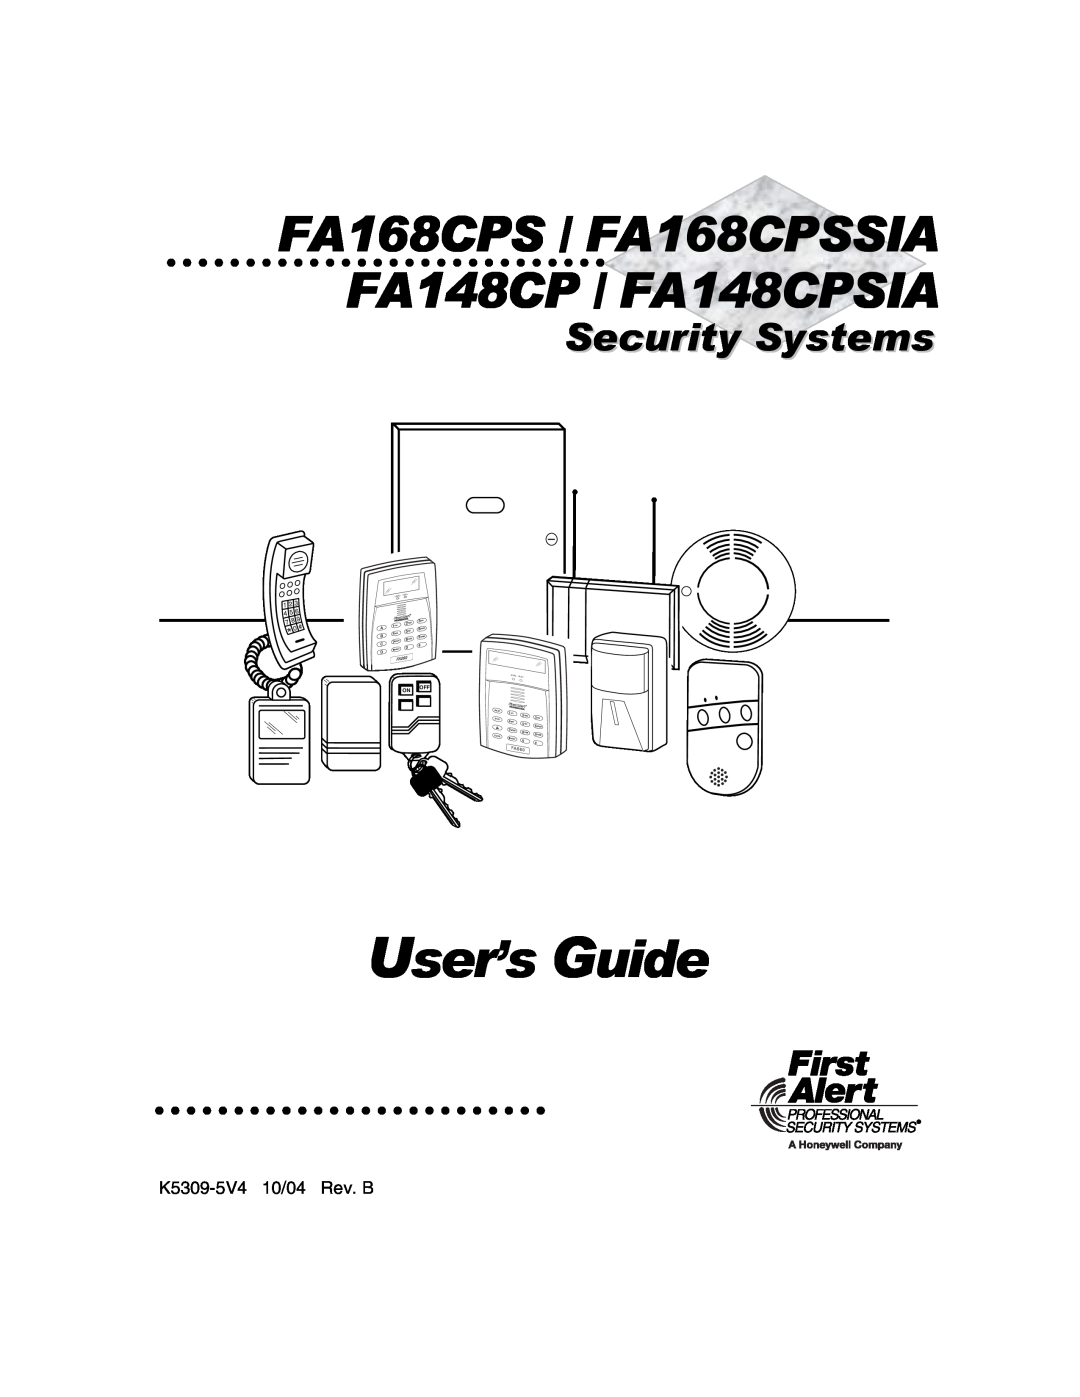 First Alert manual FA168CPS / FA168CPSSIA FA148CP / FA148CPSIA, Security Systems, 1OFFMAX, Away, 5TEST, 8CODE, 9CHIME 